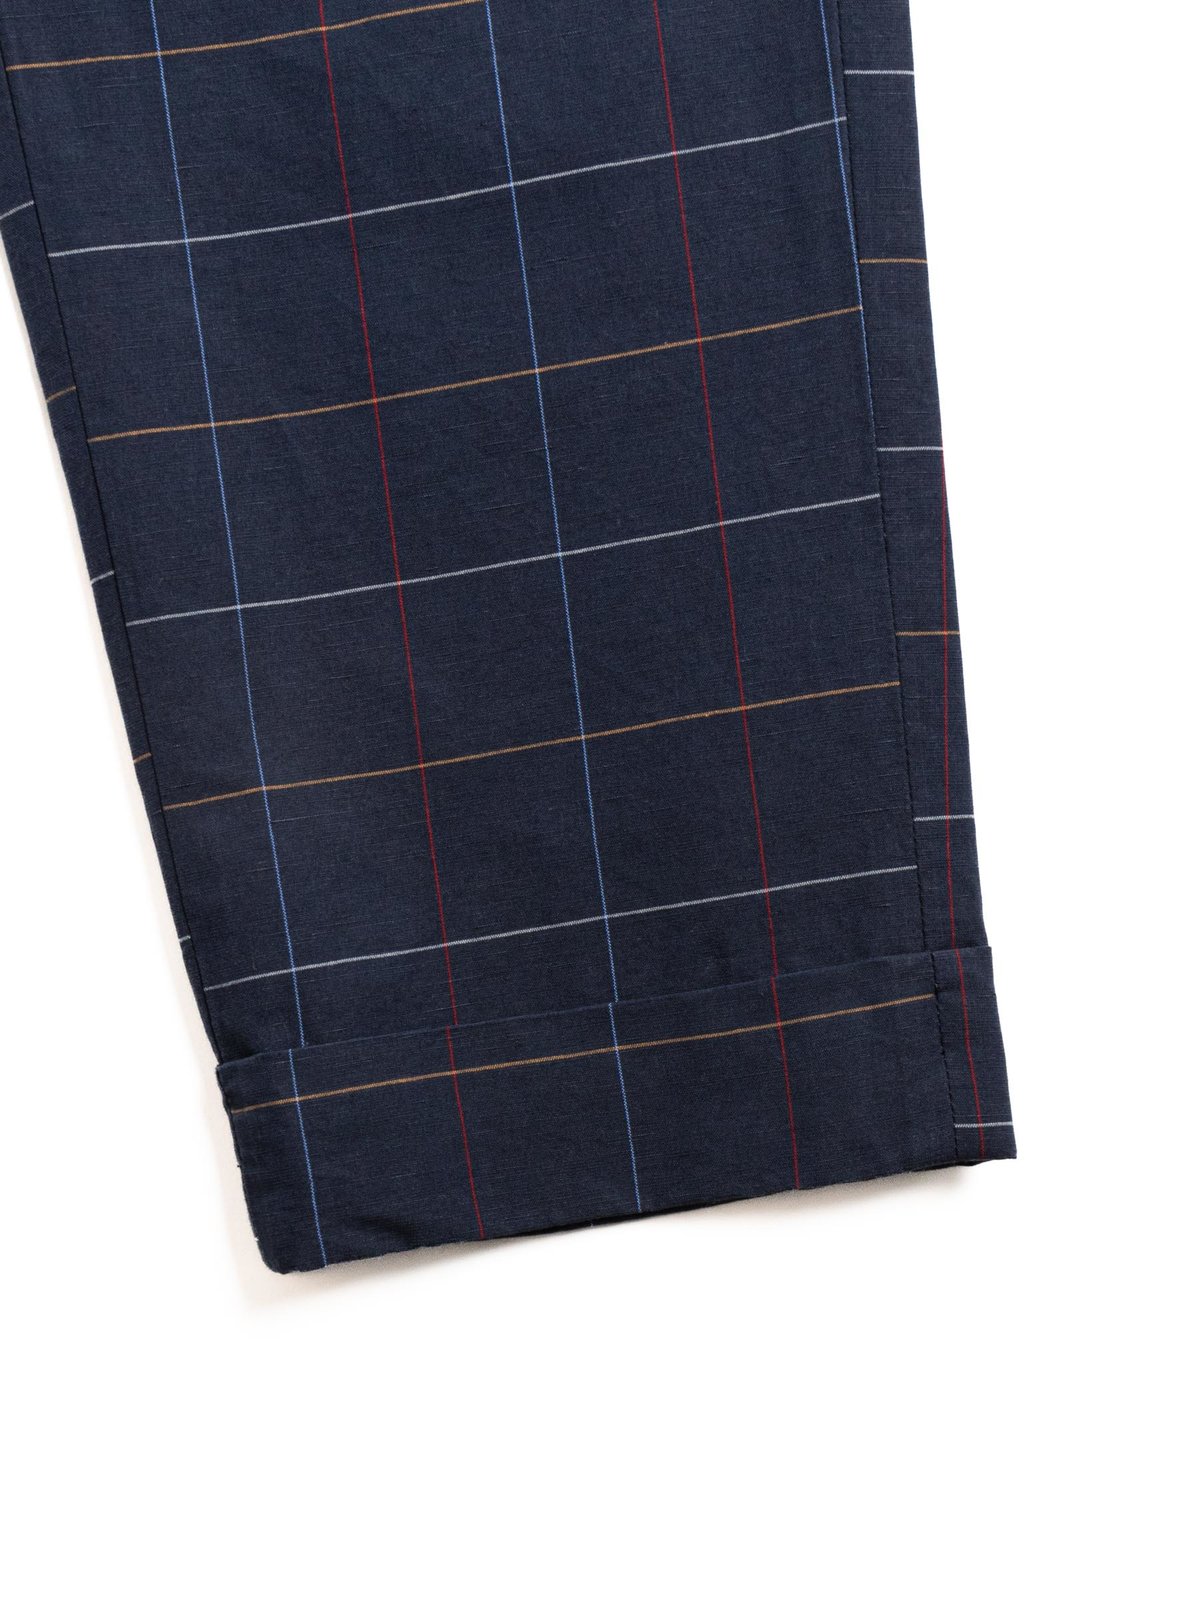 ANDOVER PANT NAVY CL WINDOWPANE - Image 4